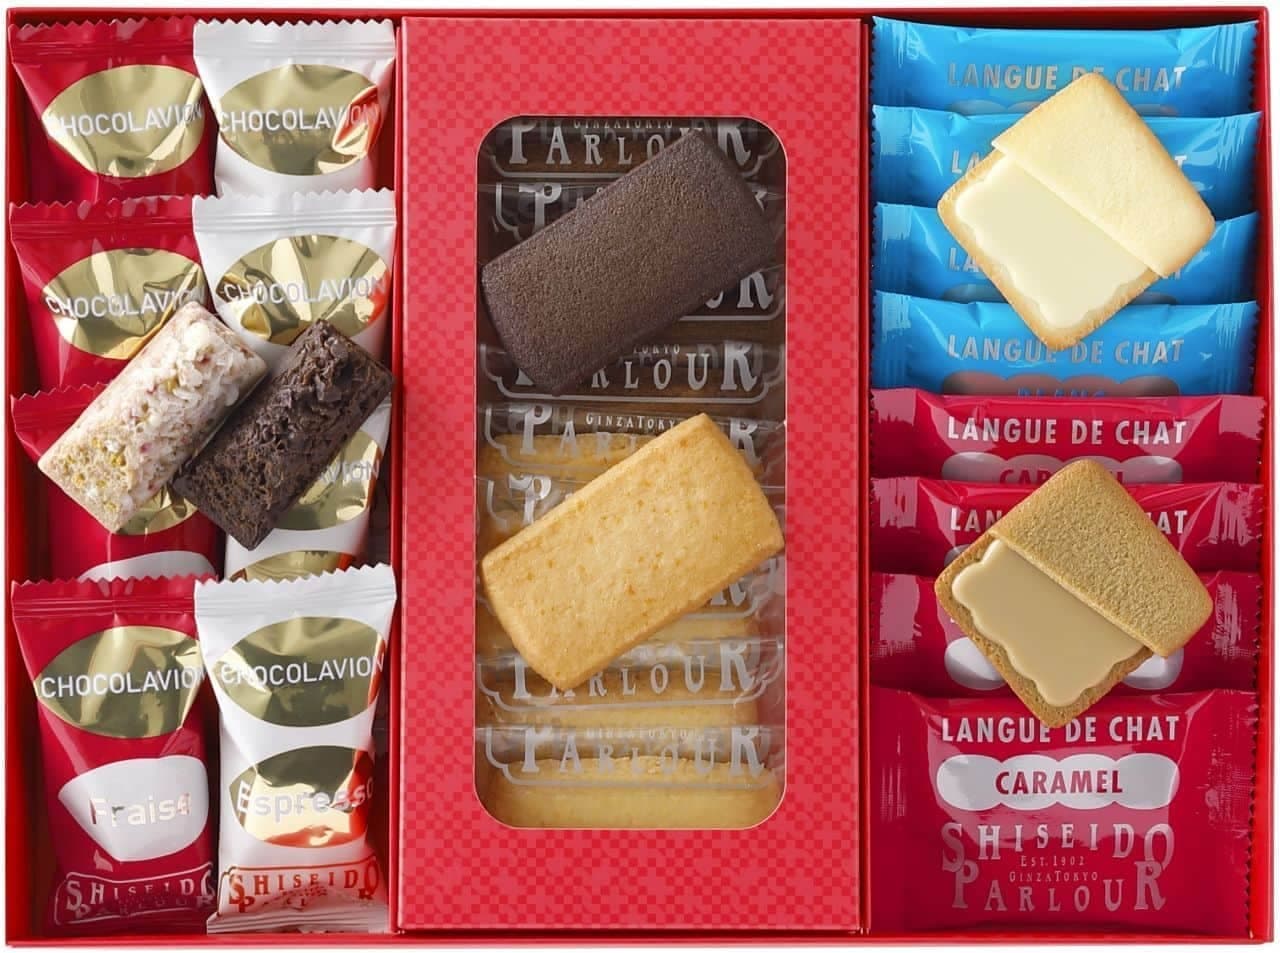 Shiseido Parlor "New Year's Sweets" - An assortment of confections perfect as gifts to celebrate the beginning of the New Year